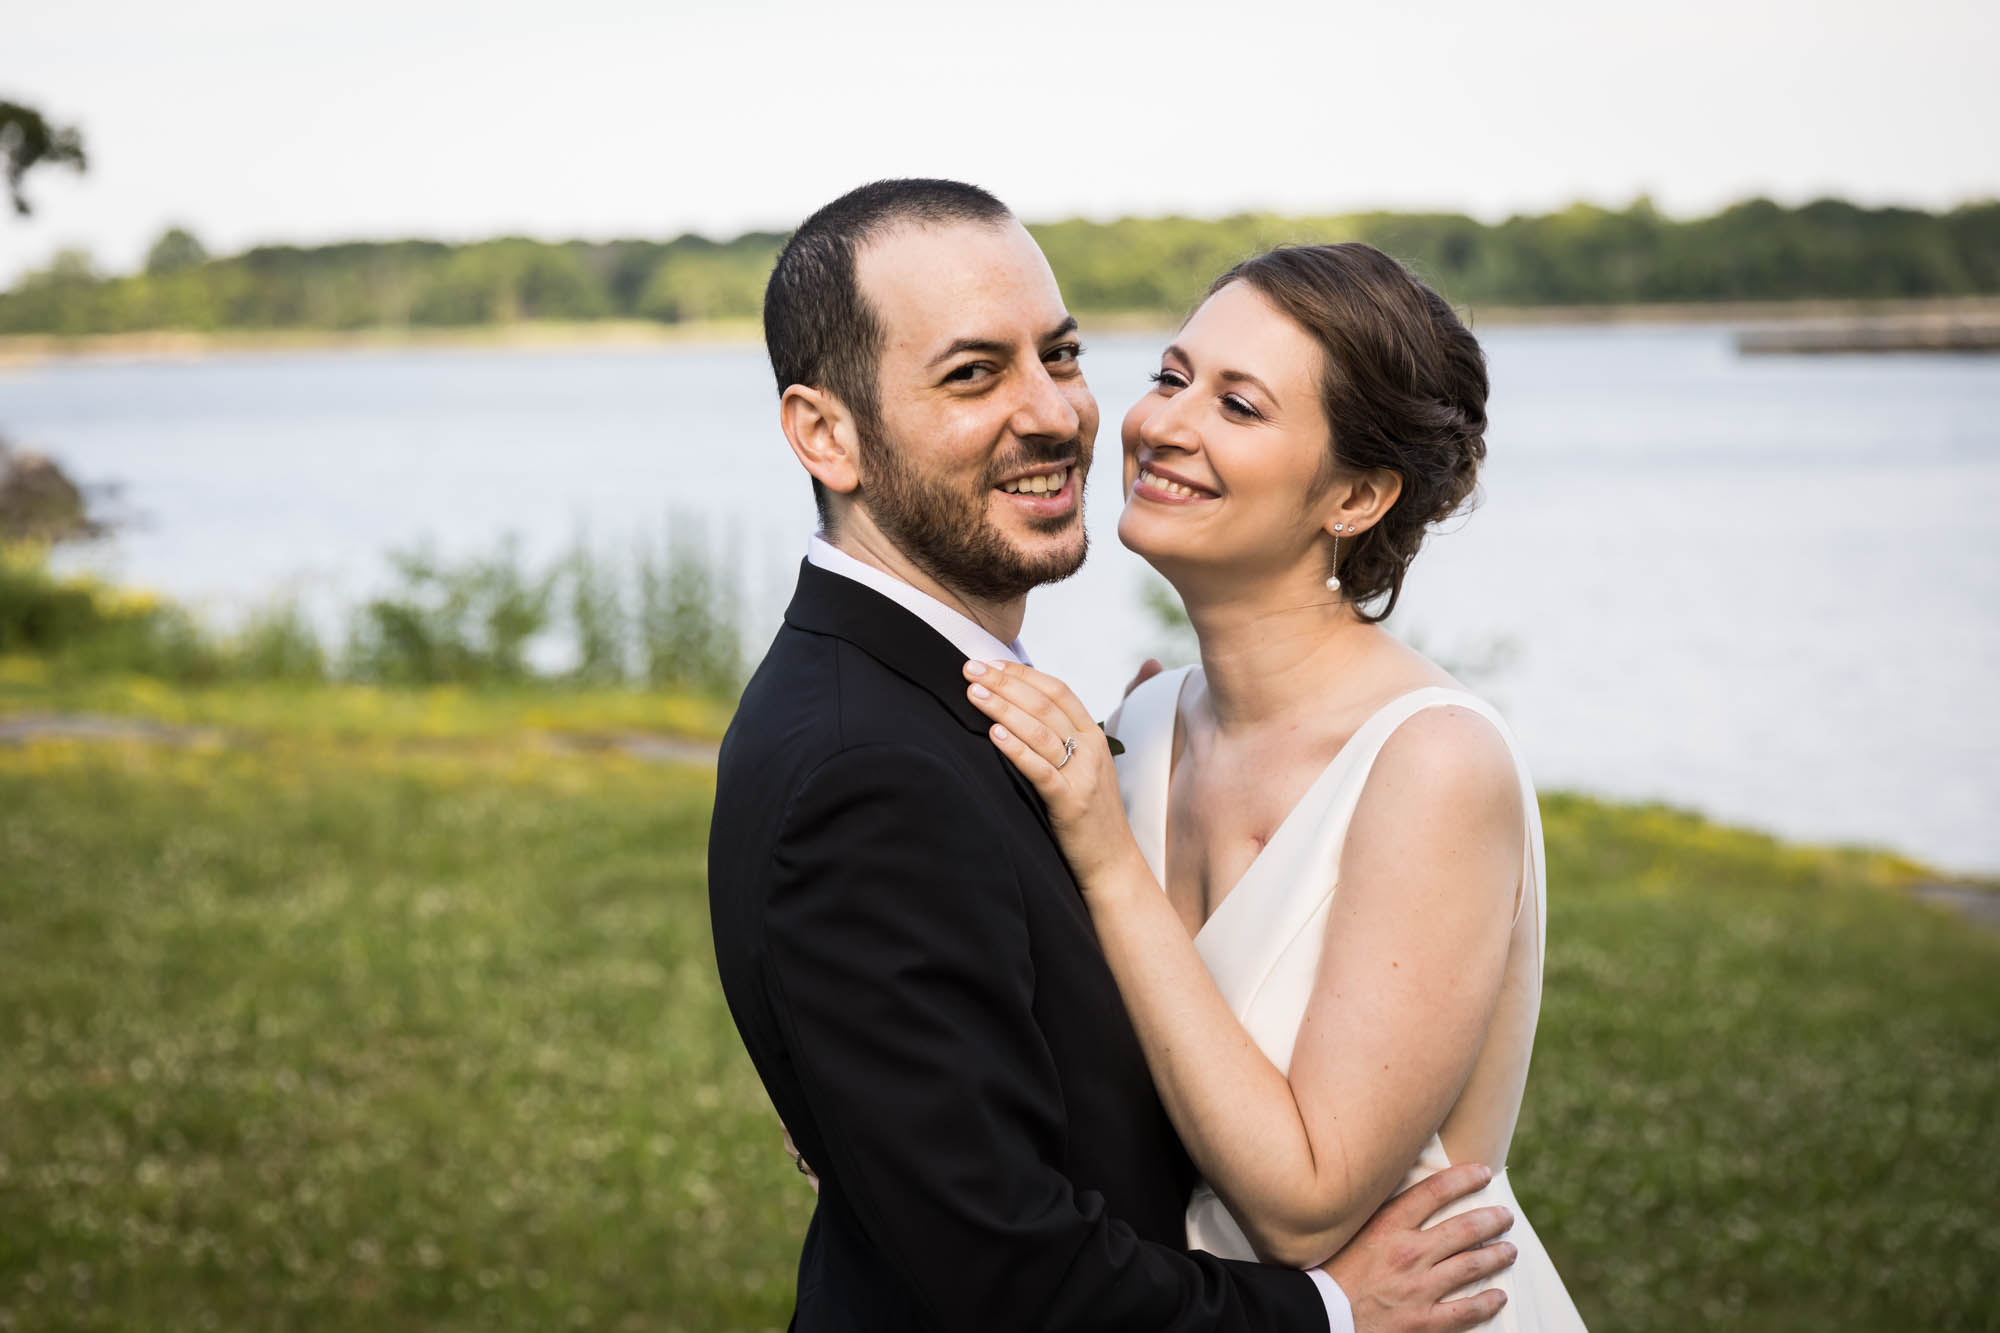 Glen Island Harbour Club wedding photos of bride and groom in front of grass and waterfront